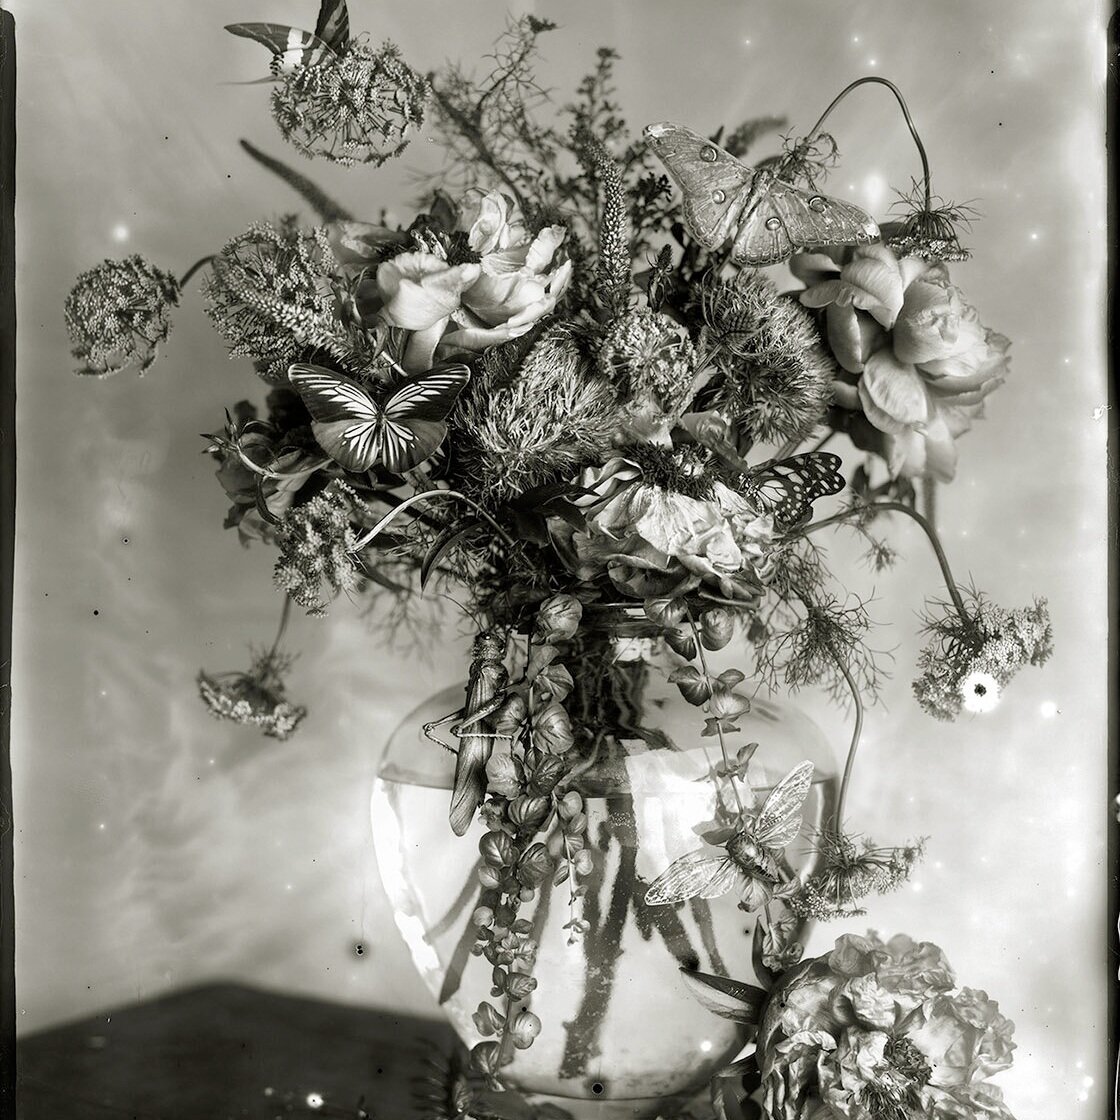   Whitney Lewis-Smith  What Came In With The Flowers   ,  2014 Archival Pigment Ink Print on 100% Cotton Rag Paper 74 x 62,5 x 2,25 in framed Edition 1/3 Jennifer Kostuik Gallery 